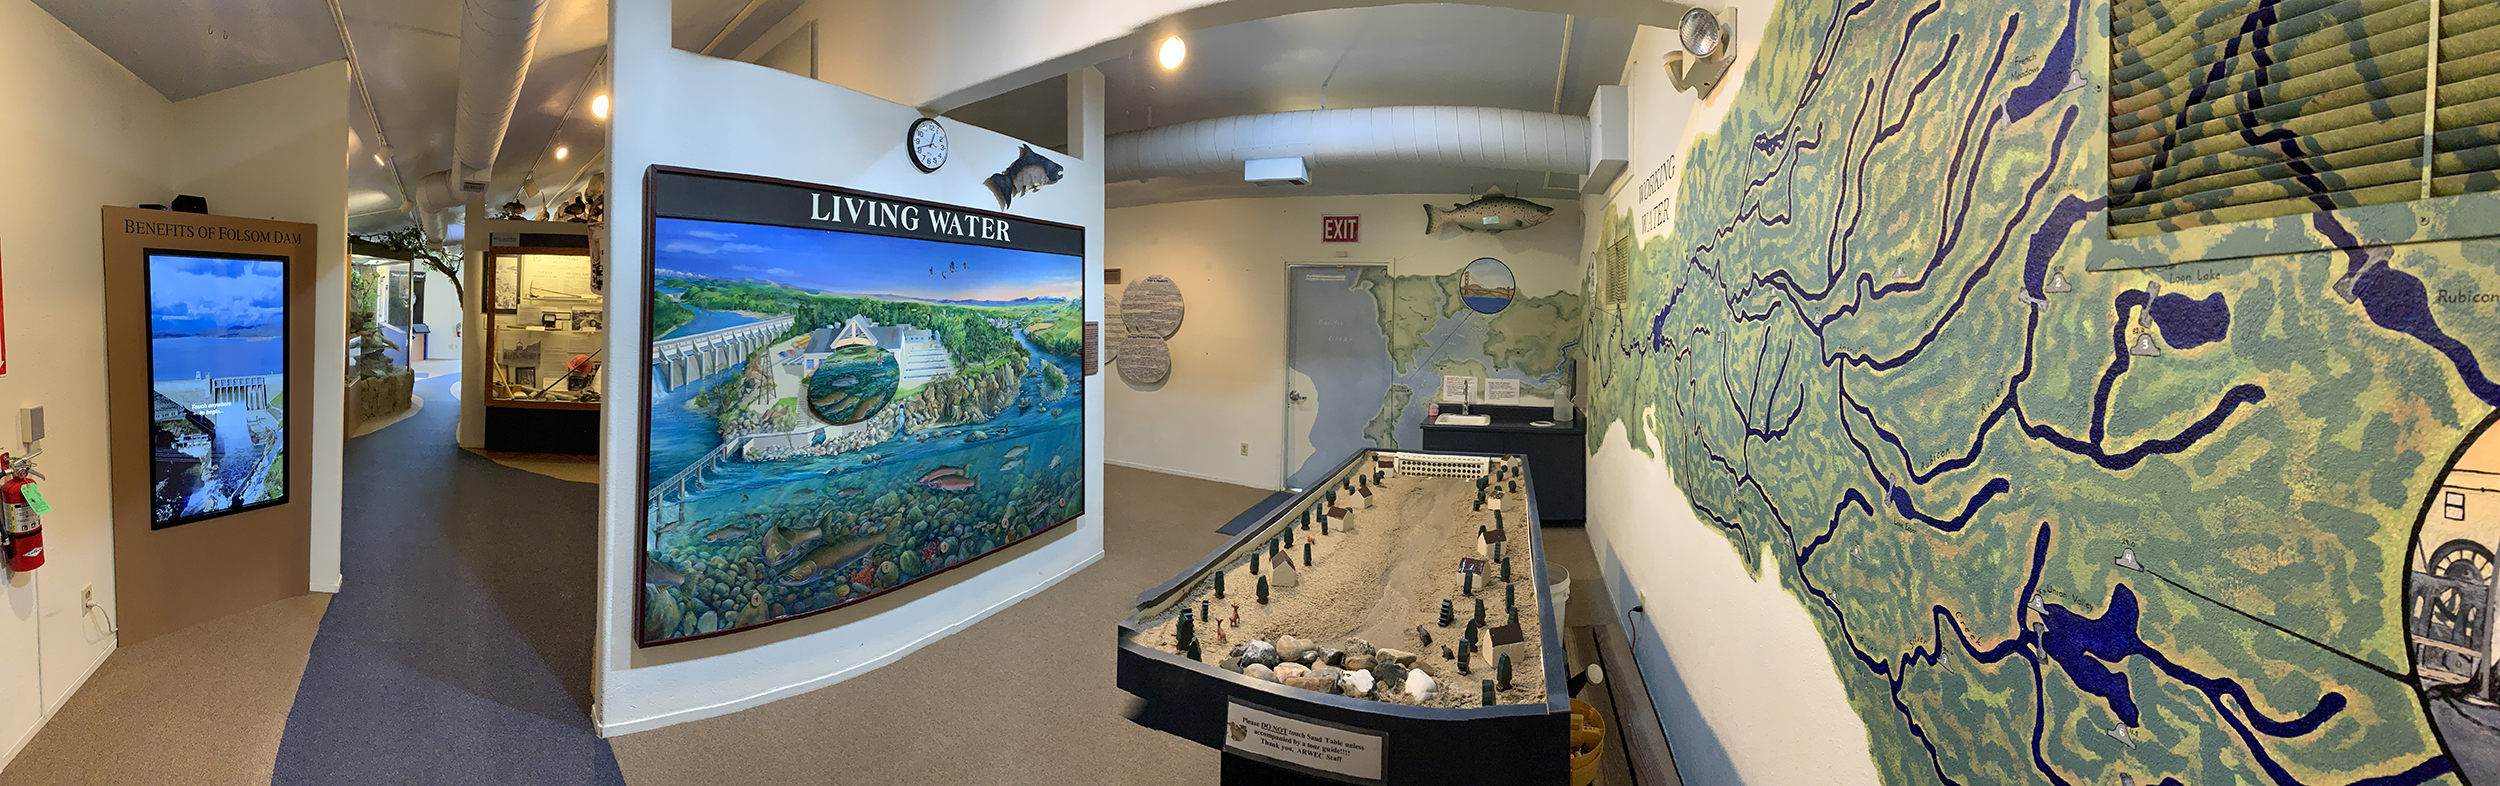 American River Water Education Center